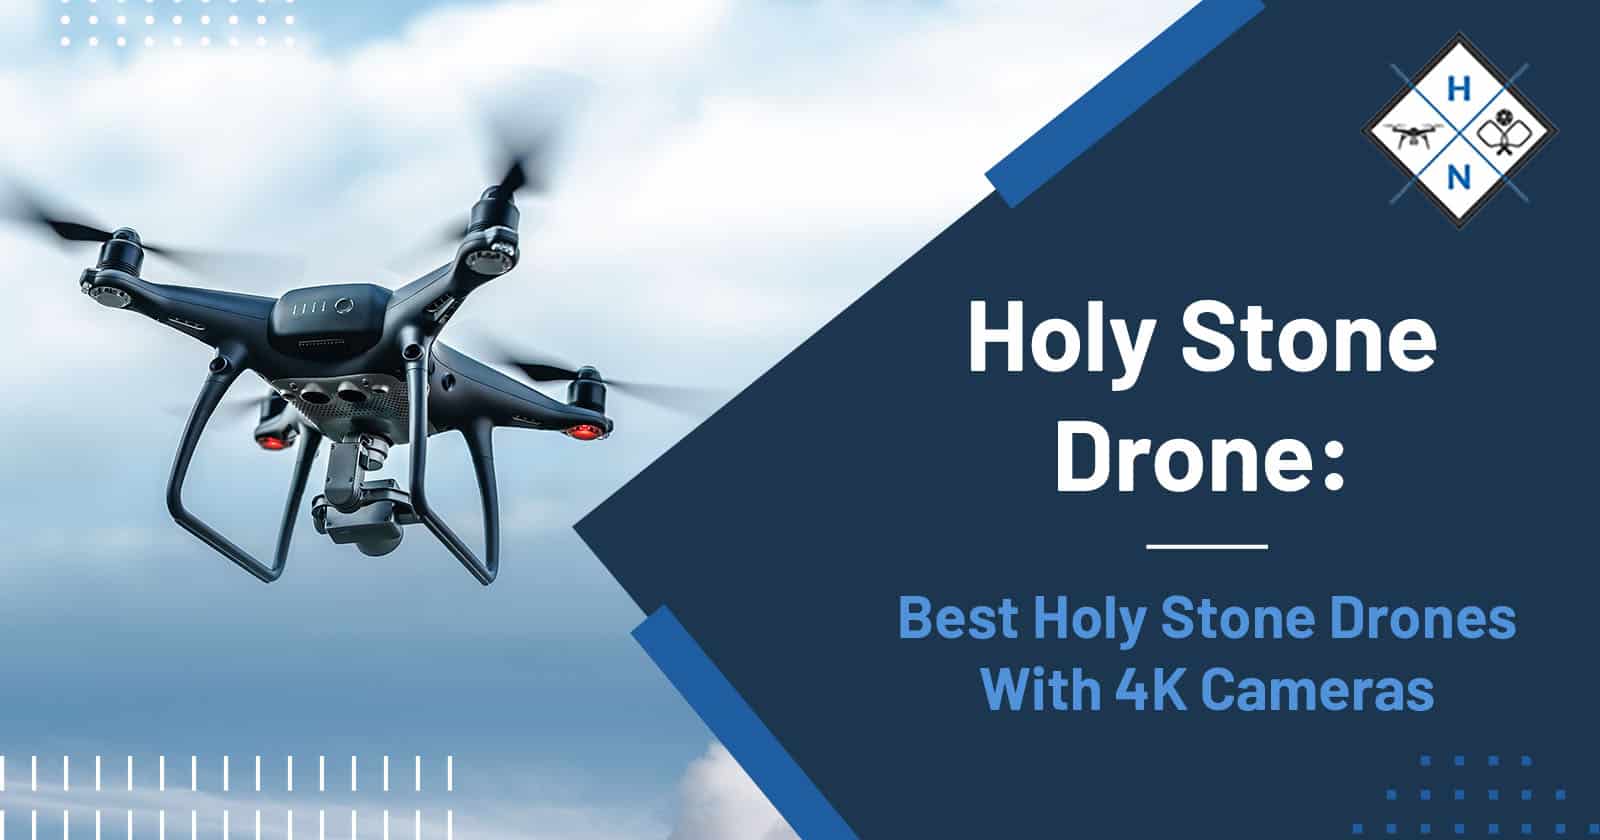 Holy Stone Drone: Best Holy Stone Drones With 4K Cameras